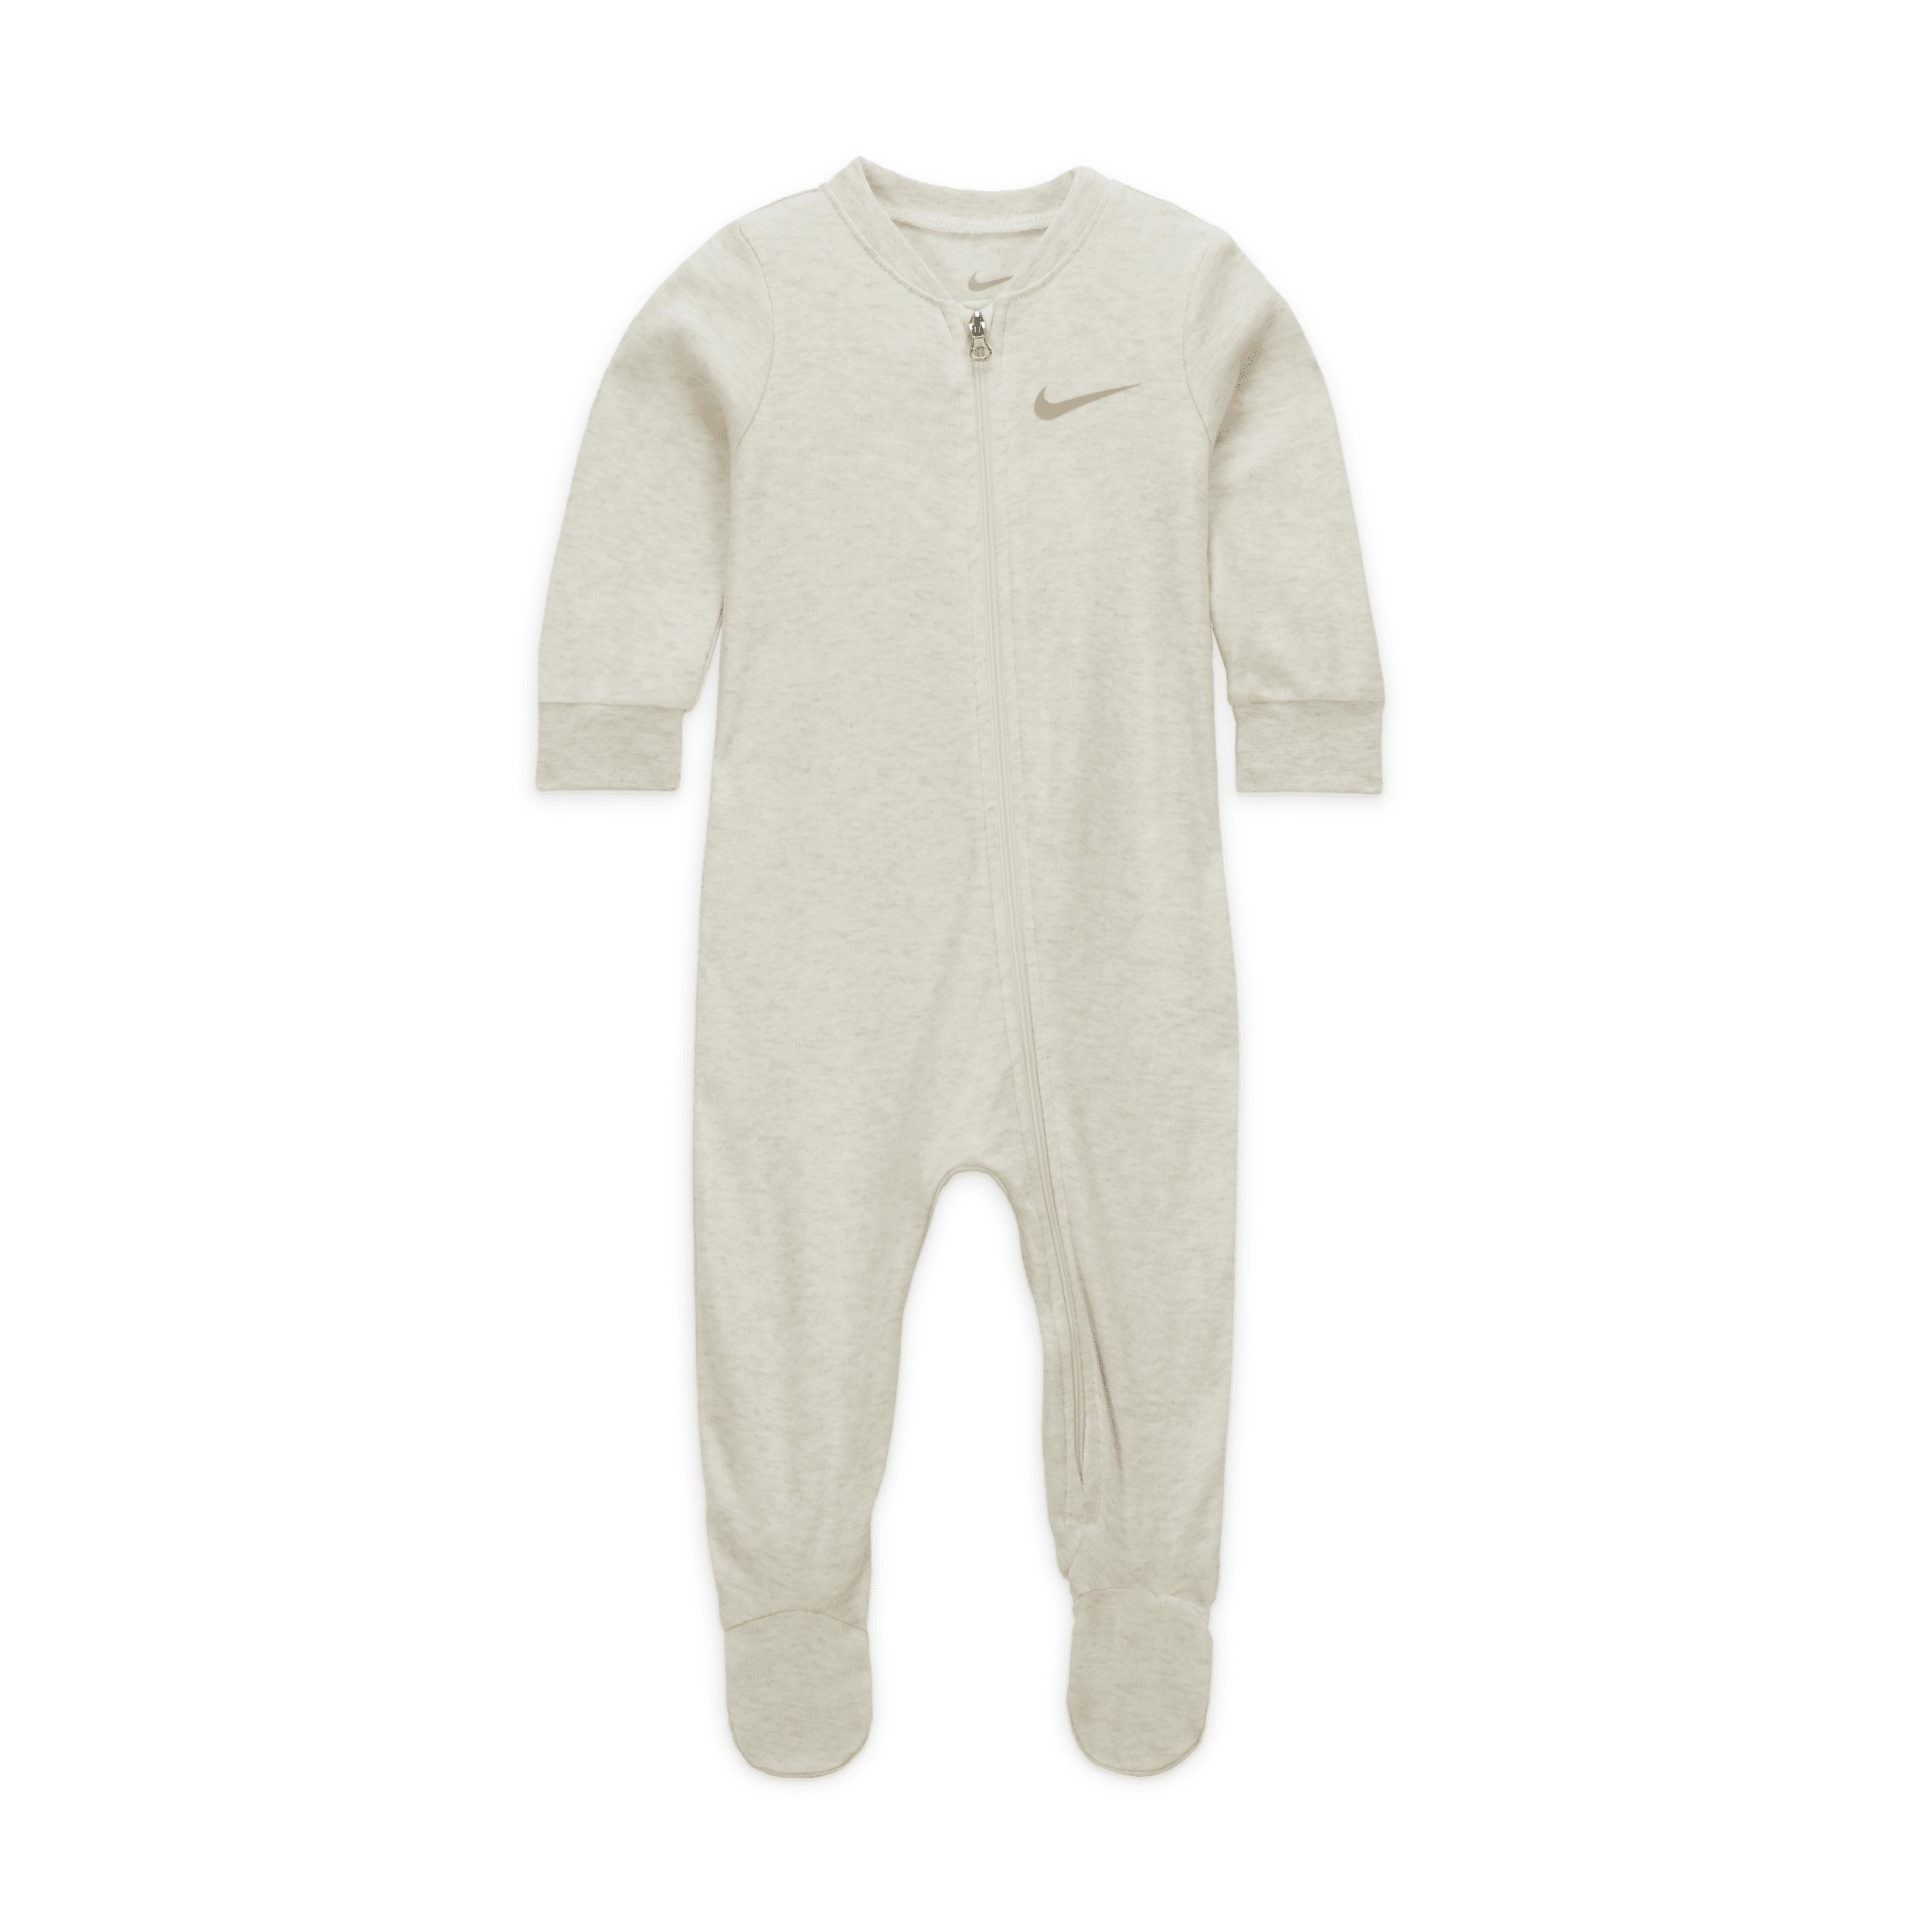 NIKE ESSENTIALS FOOTED COVERALL BABY COVERALL,1014410983